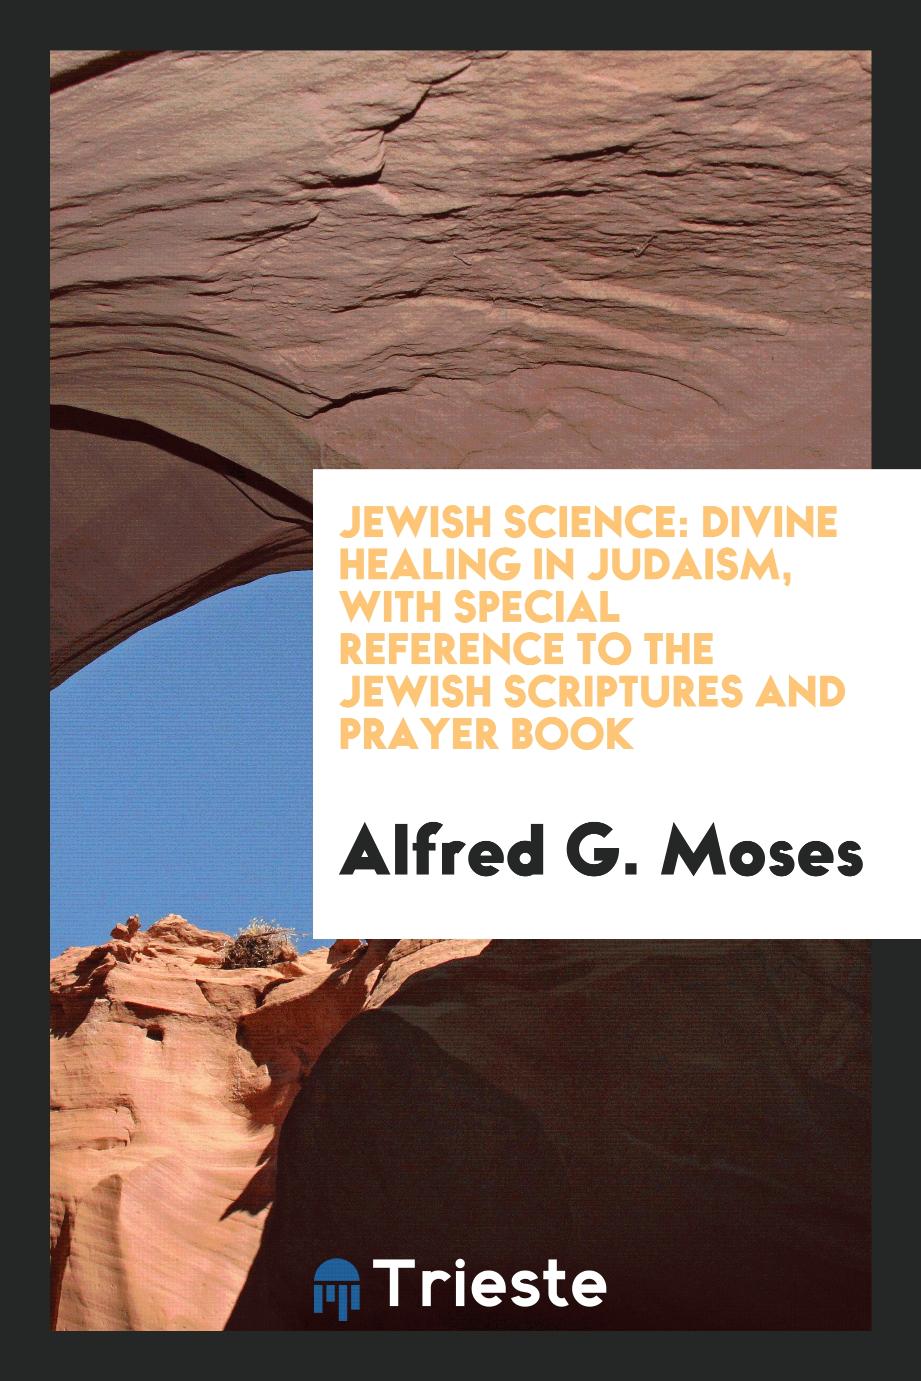 Jewish Science: Divine Healing in Judaism, with Special Reference to the Jewish Scriptures and Prayer Book